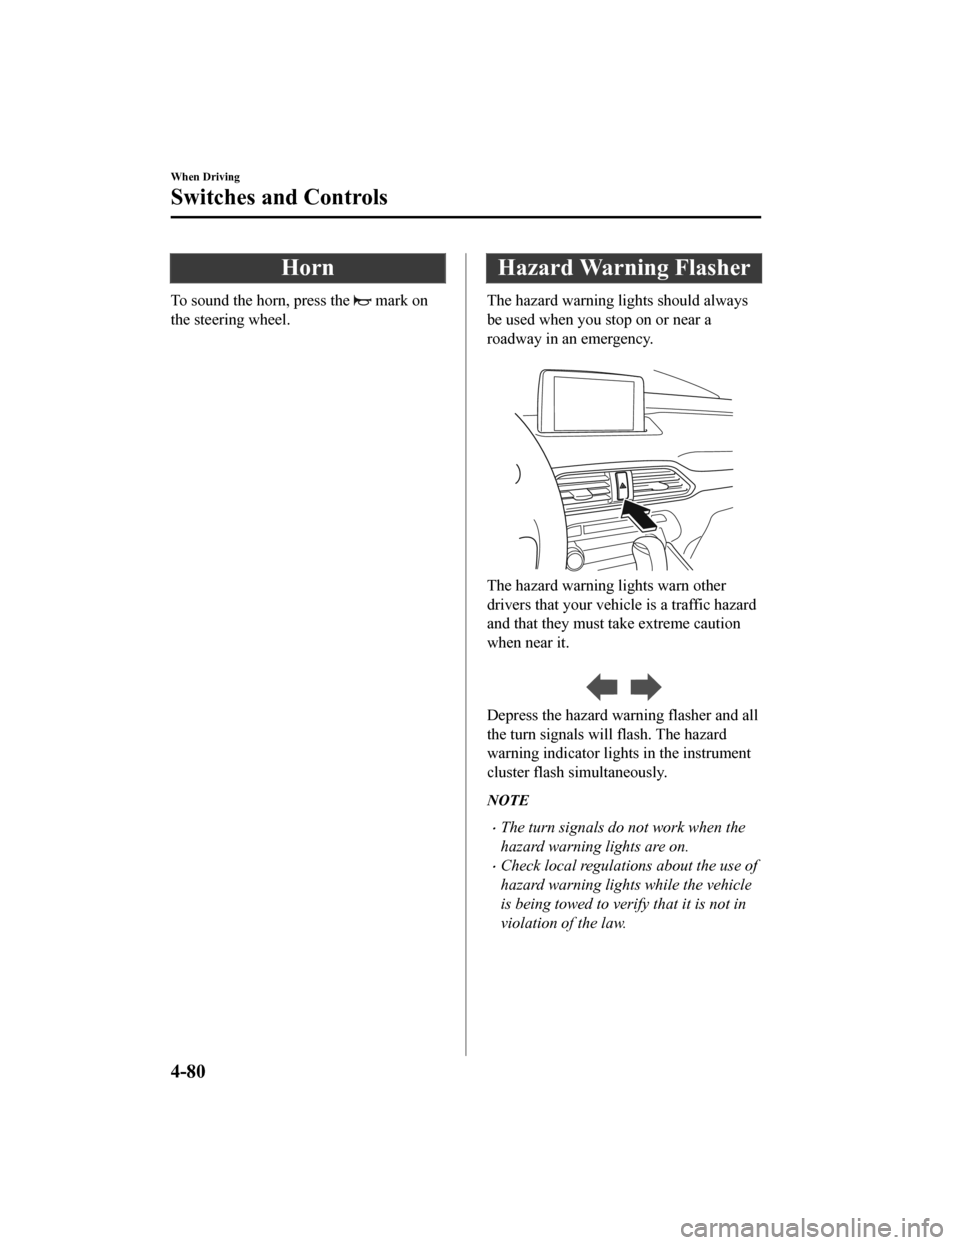 MAZDA MODEL CX-9 2019   (in English) Owners Manual Horn
To sound the horn, press the  mark on
the steering wheel.
Hazard Warning Flasher
The hazard warning lights should always
be used when you stop on or near a
roadway in an emergency.
 
The hazard w